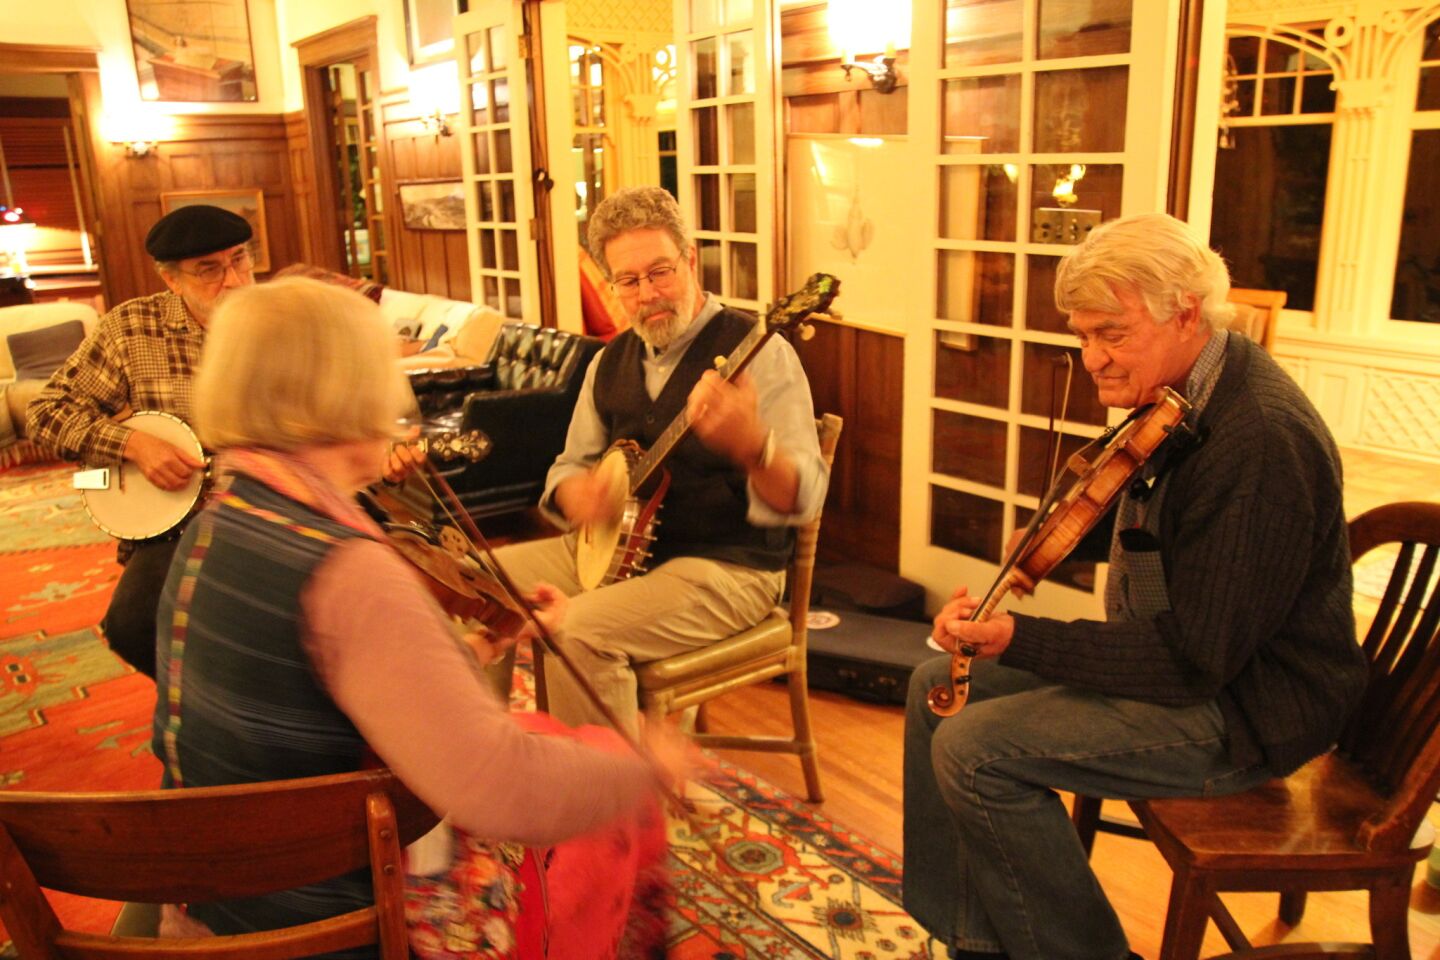 After dinner, the aficionados stick around for an informal jam session in Bunn's living room. These draw expert and novice musicians from around Southern California.